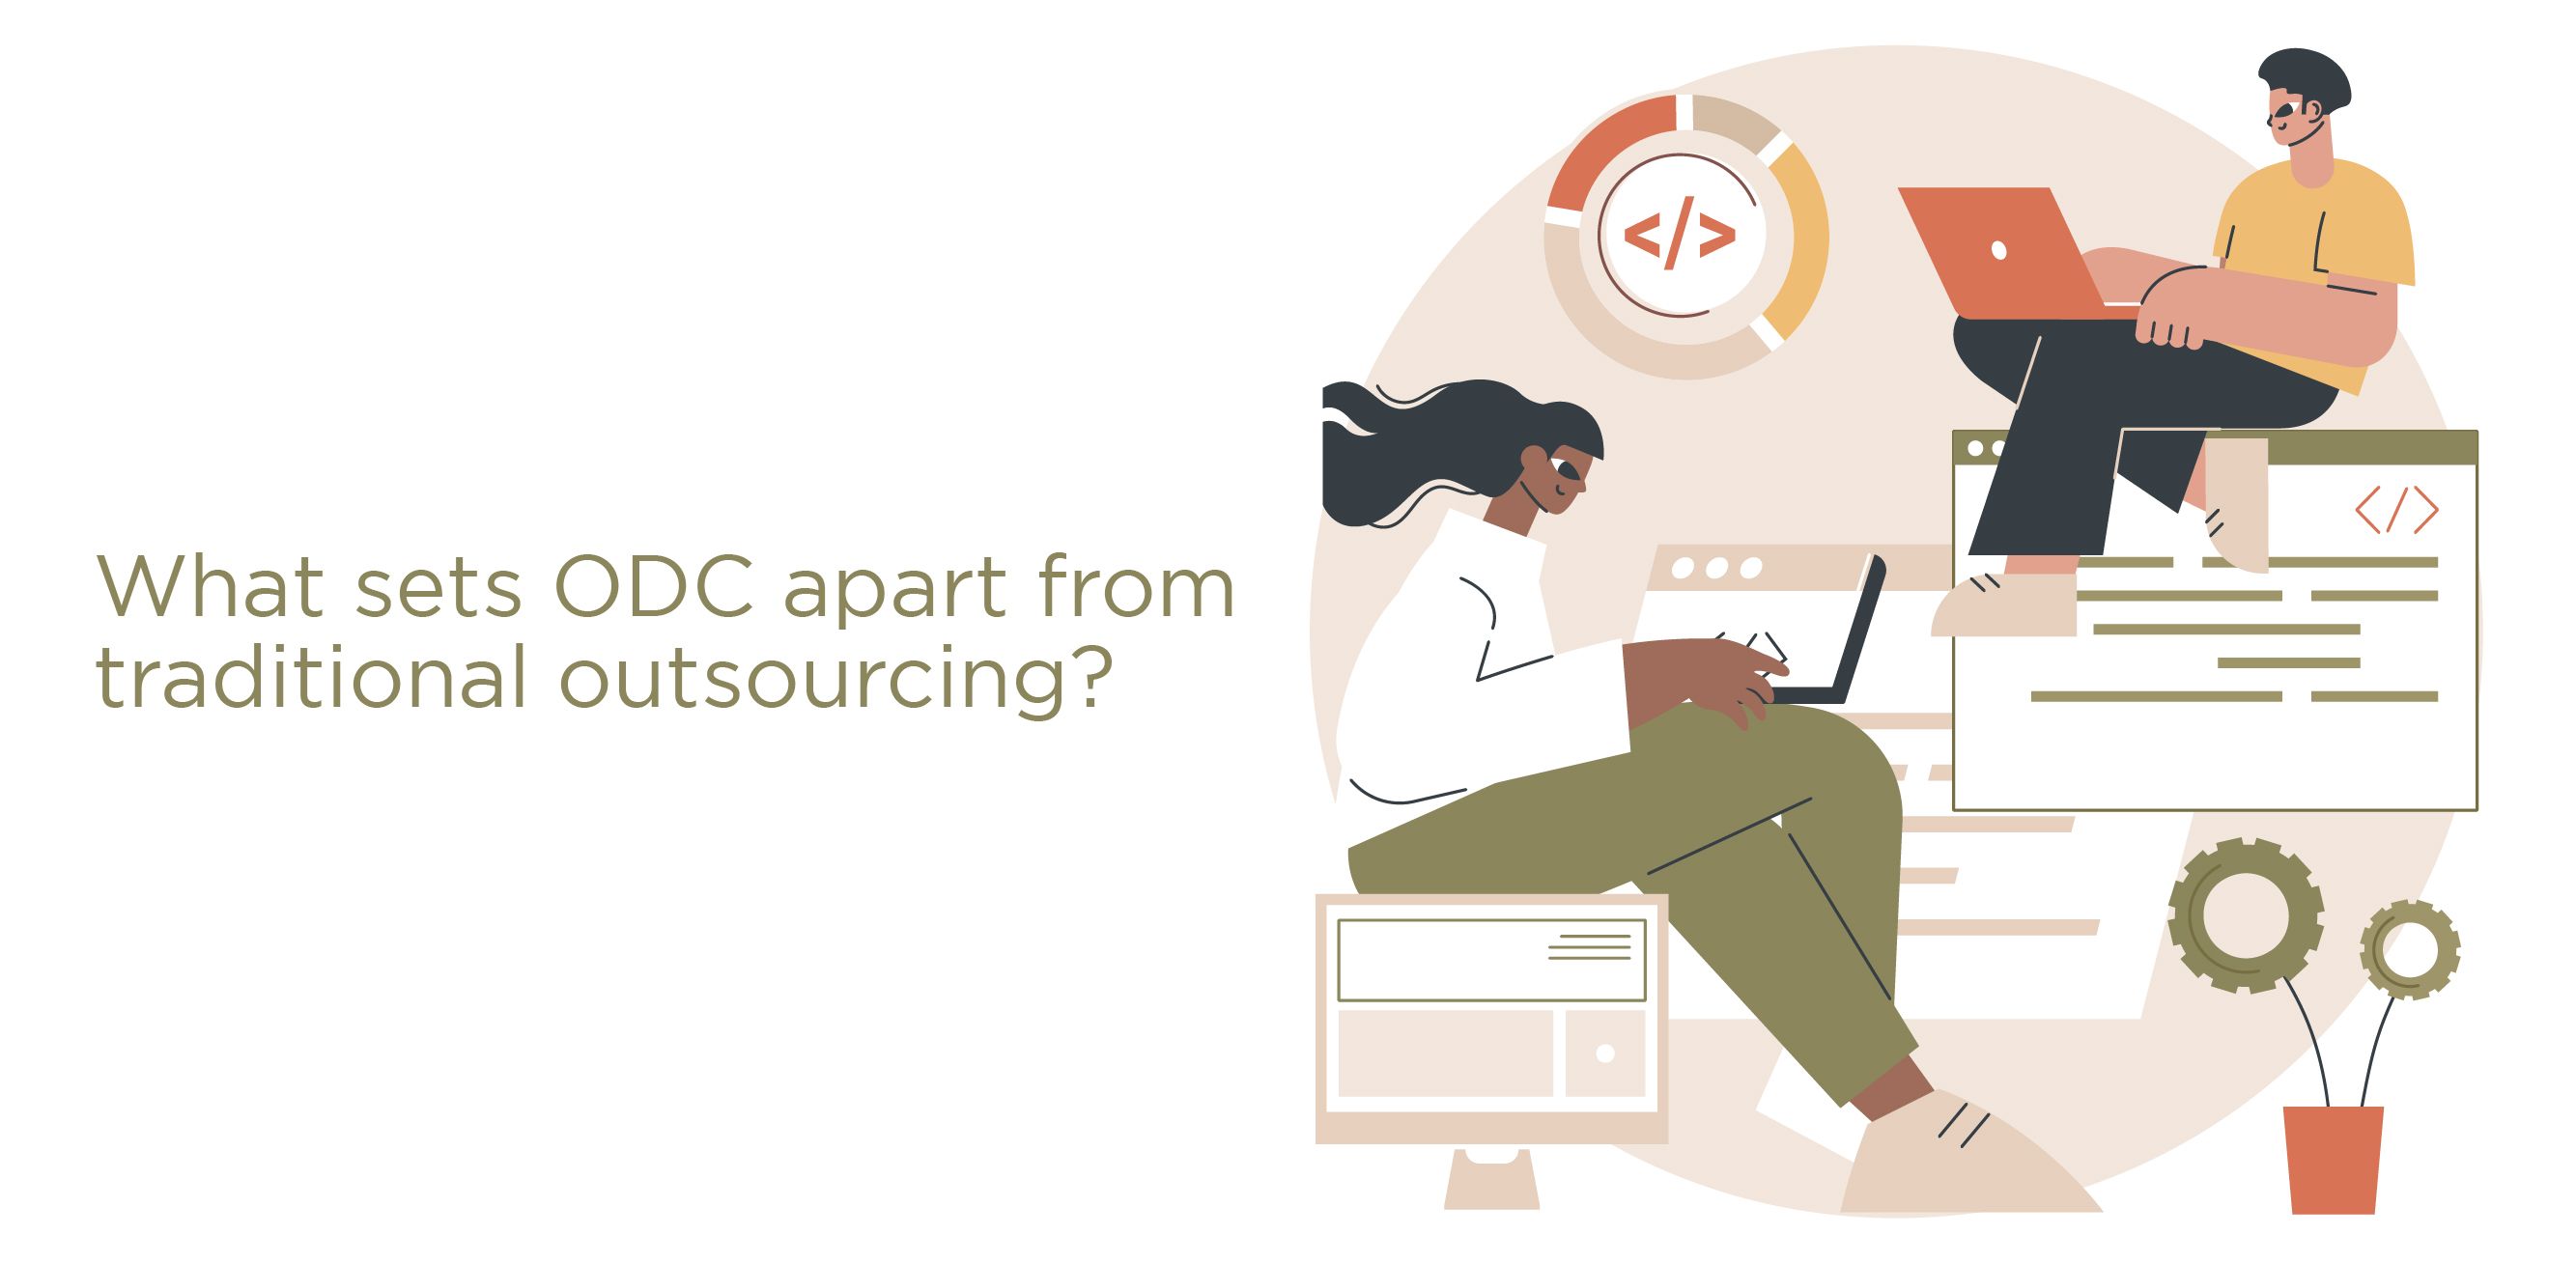 What sets ODC apart from traditional outsourcing?